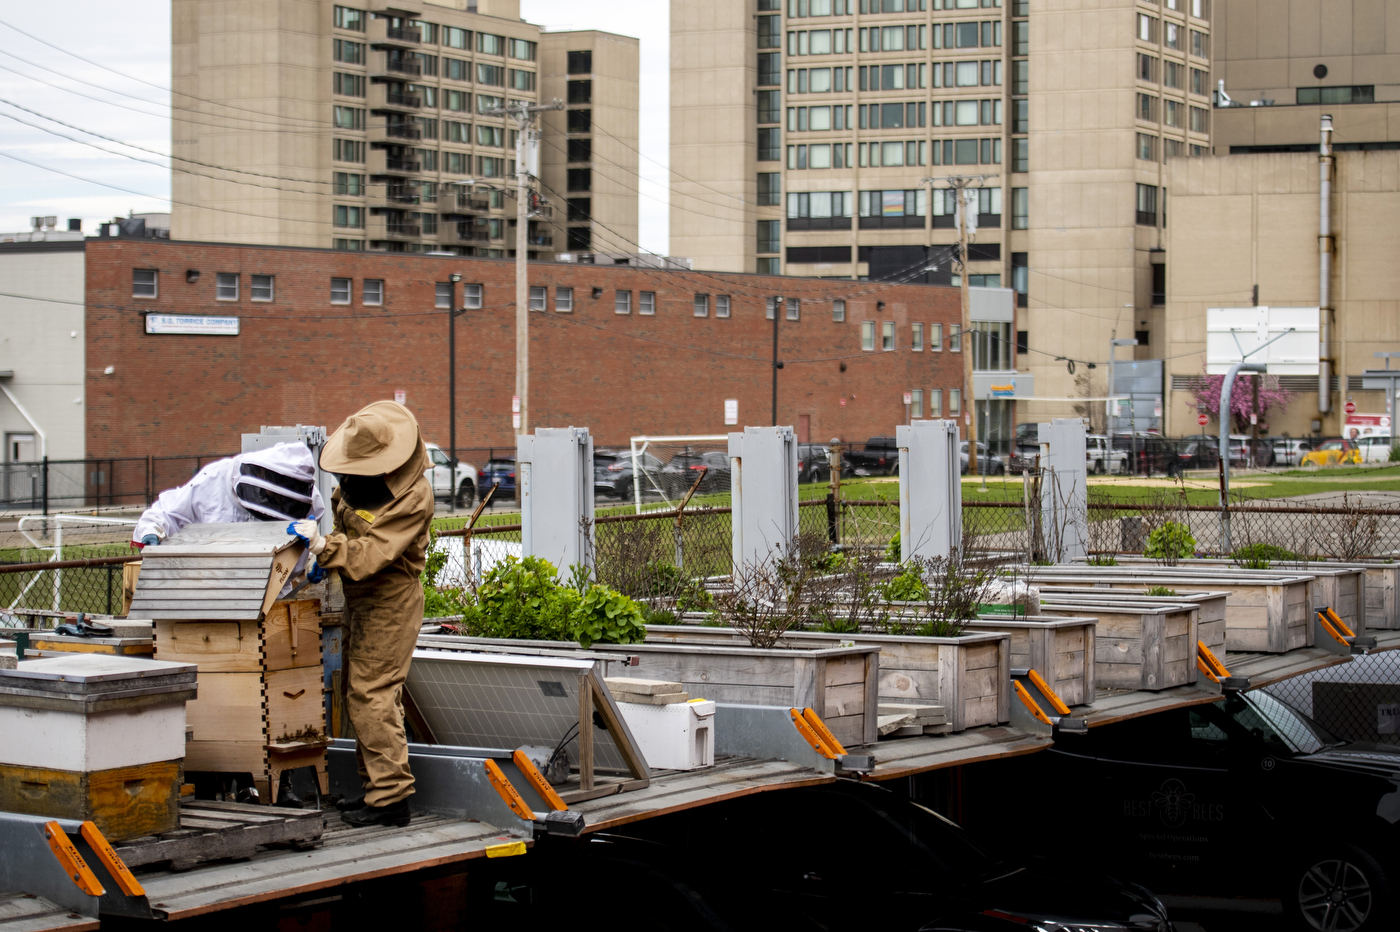 Beekeeper attending to hives on a city rooftop